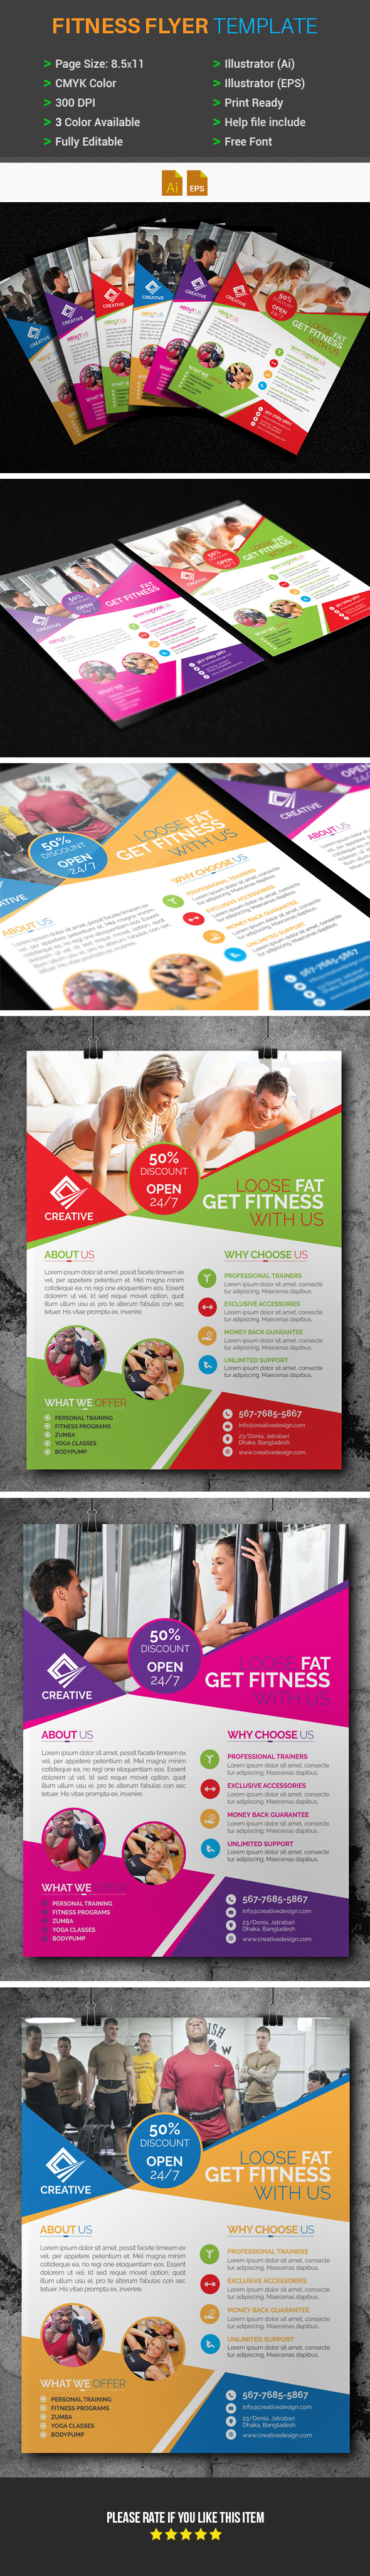 Free Fitness Gym Flyer Template By Arahimdesign On Deviantart